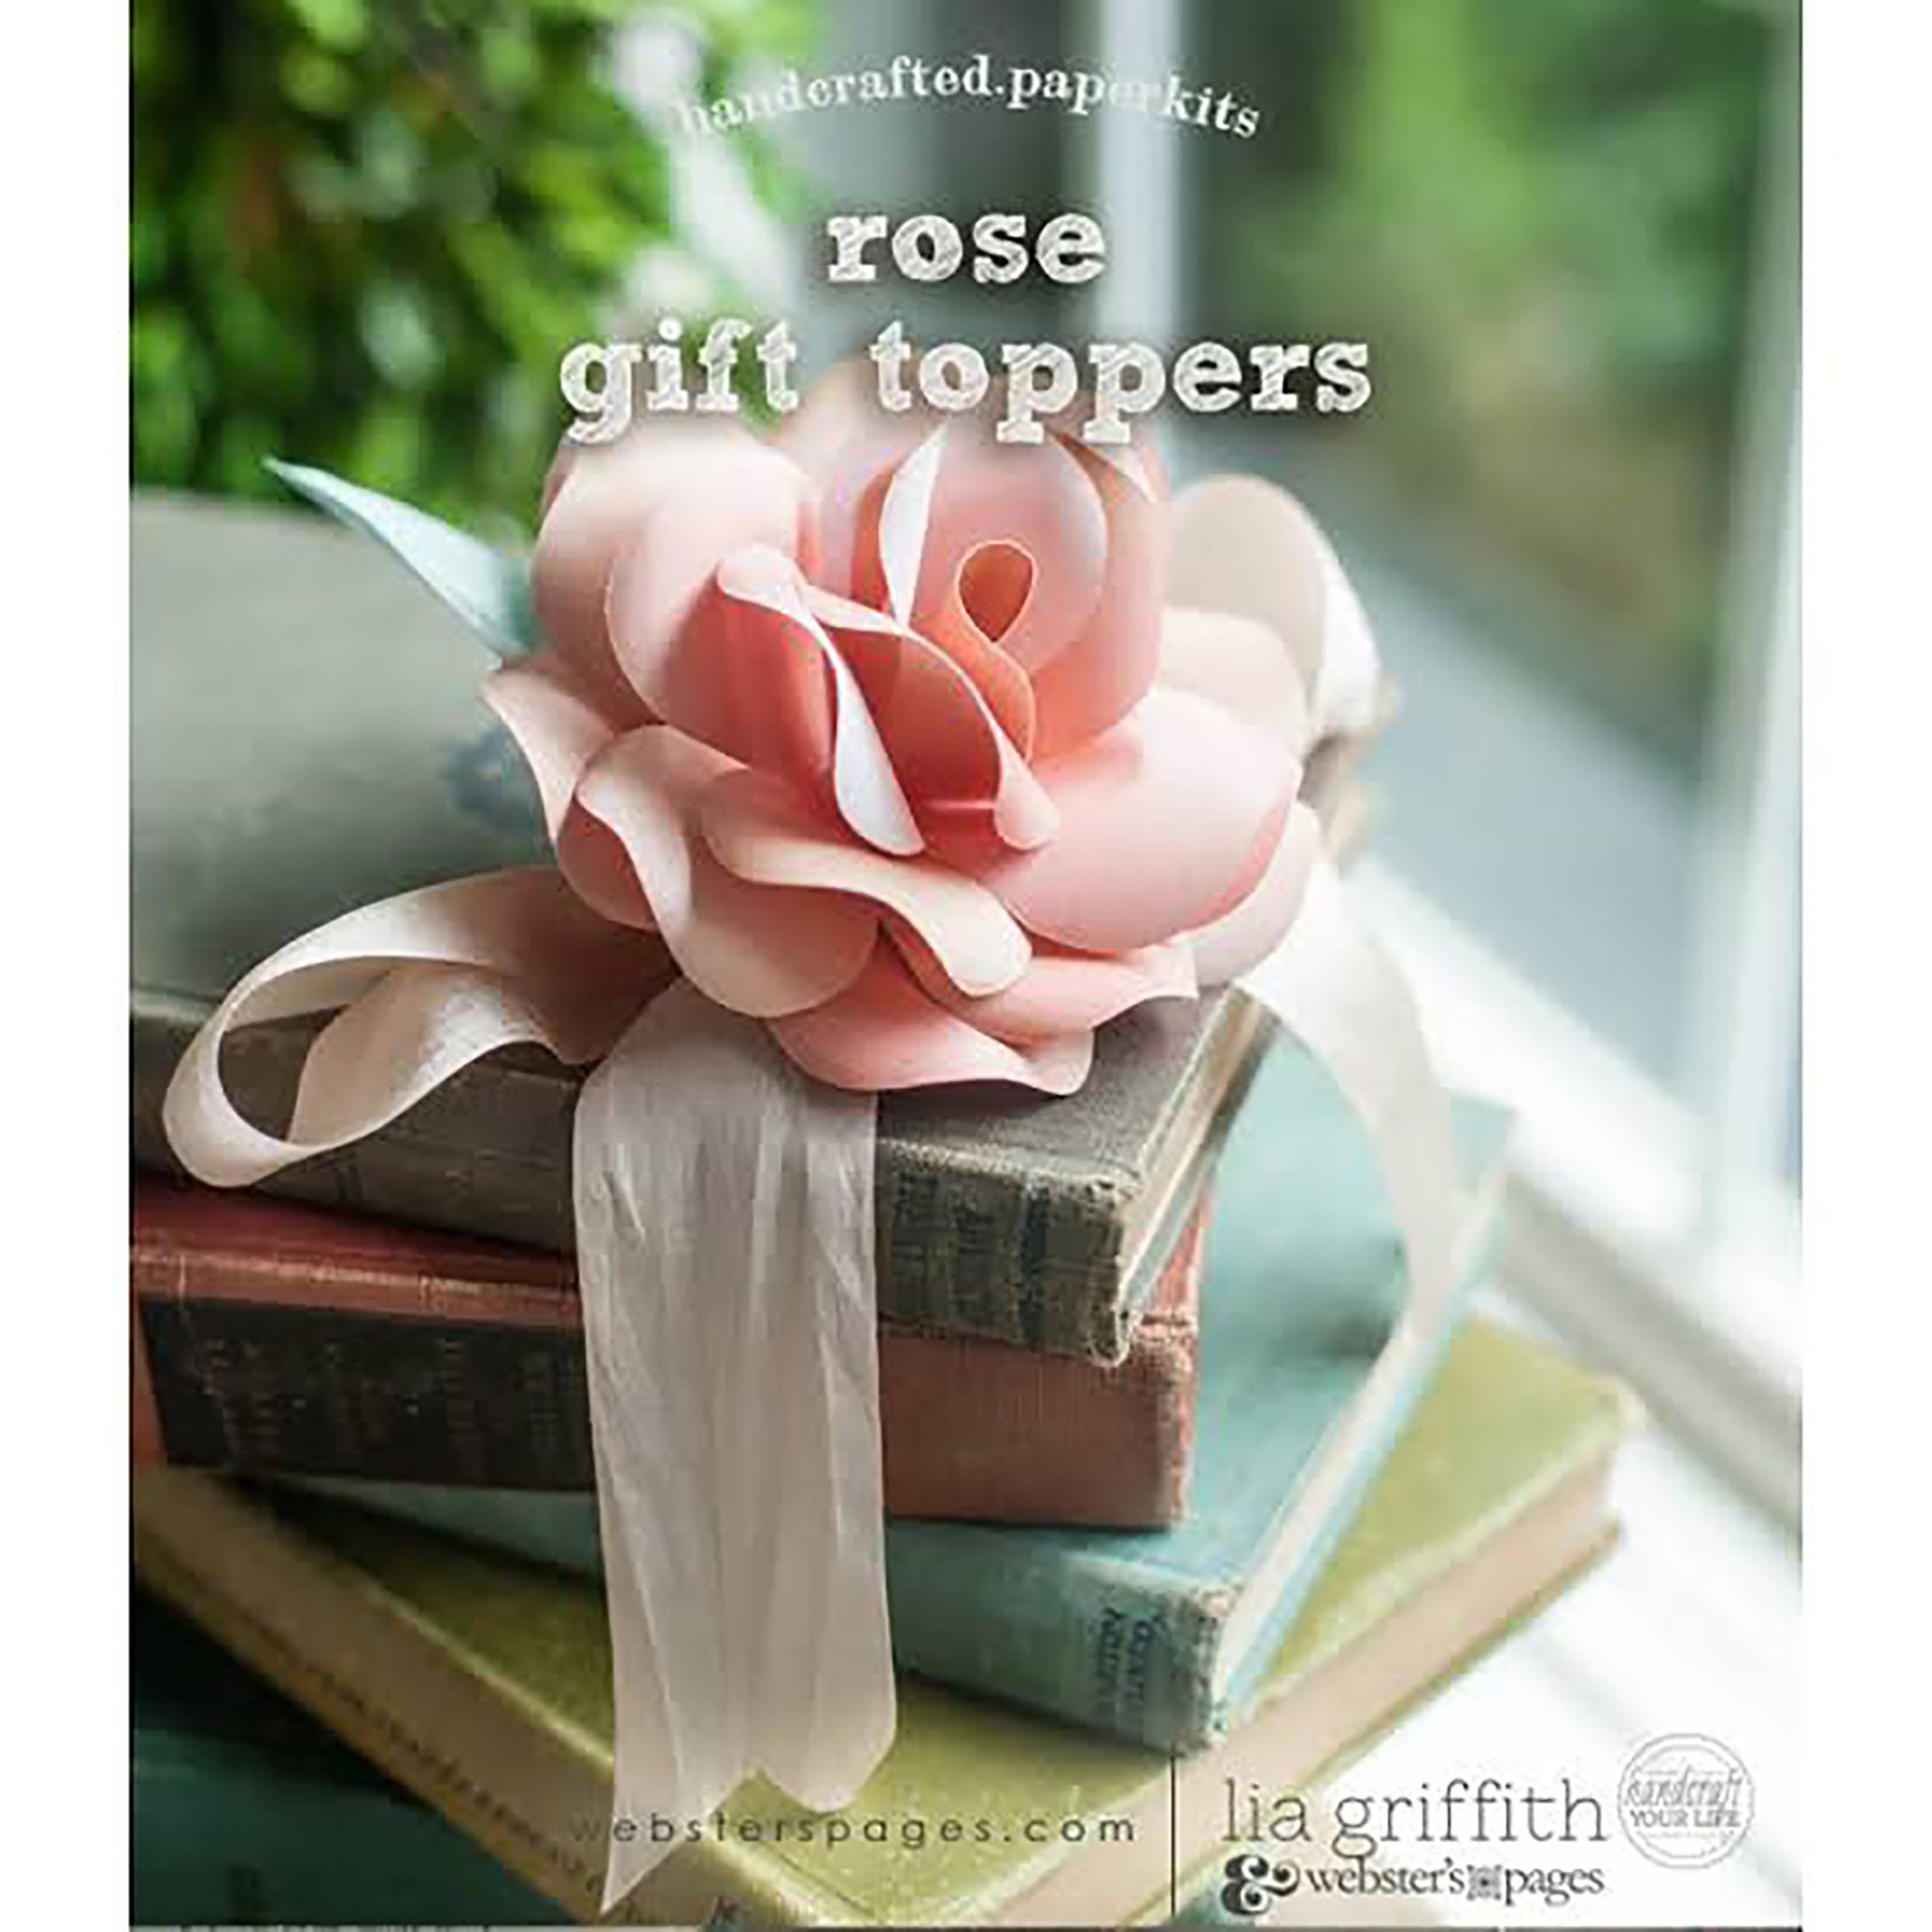 CLEARANCE!!! - Webster Pages Rose Gift Toppers Kit , Gift Toppers by Lia Griffith